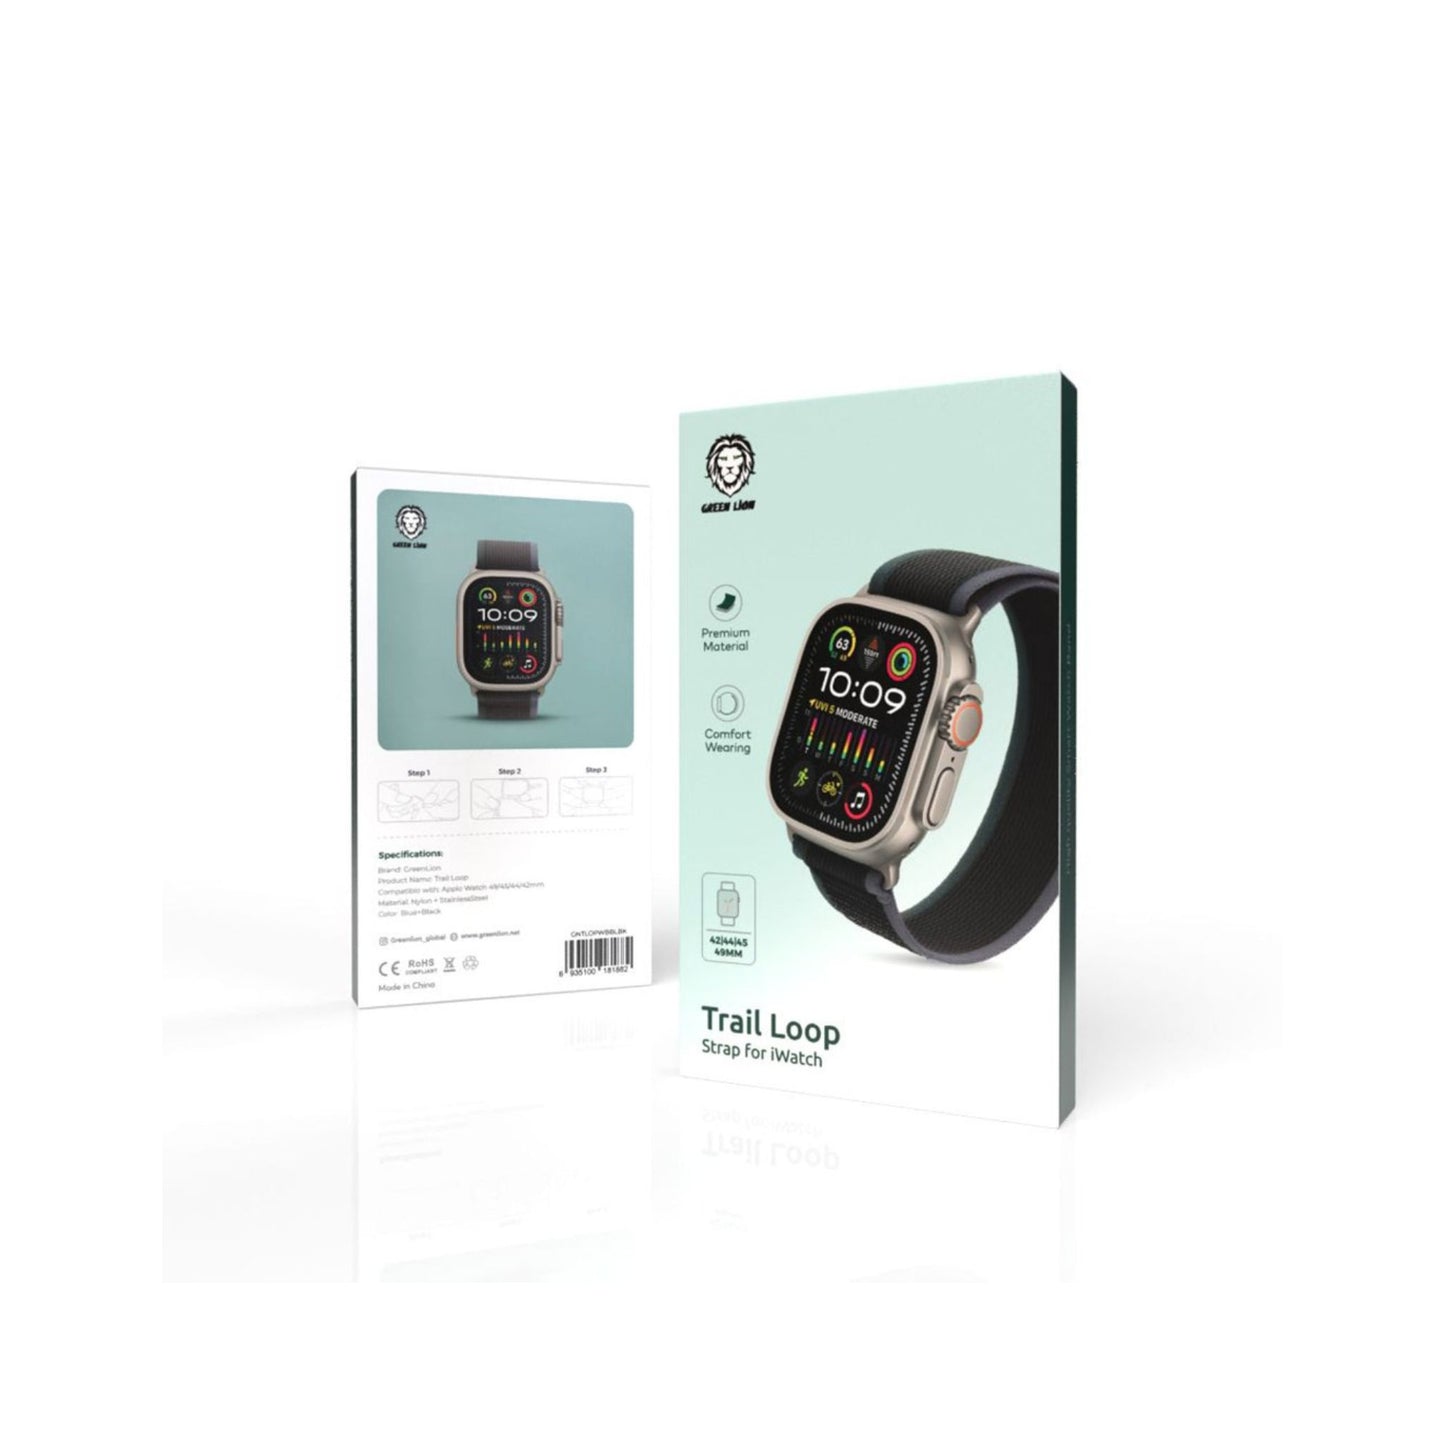 Green Lion Trail Loop Strap For iWatch_Blue+Black